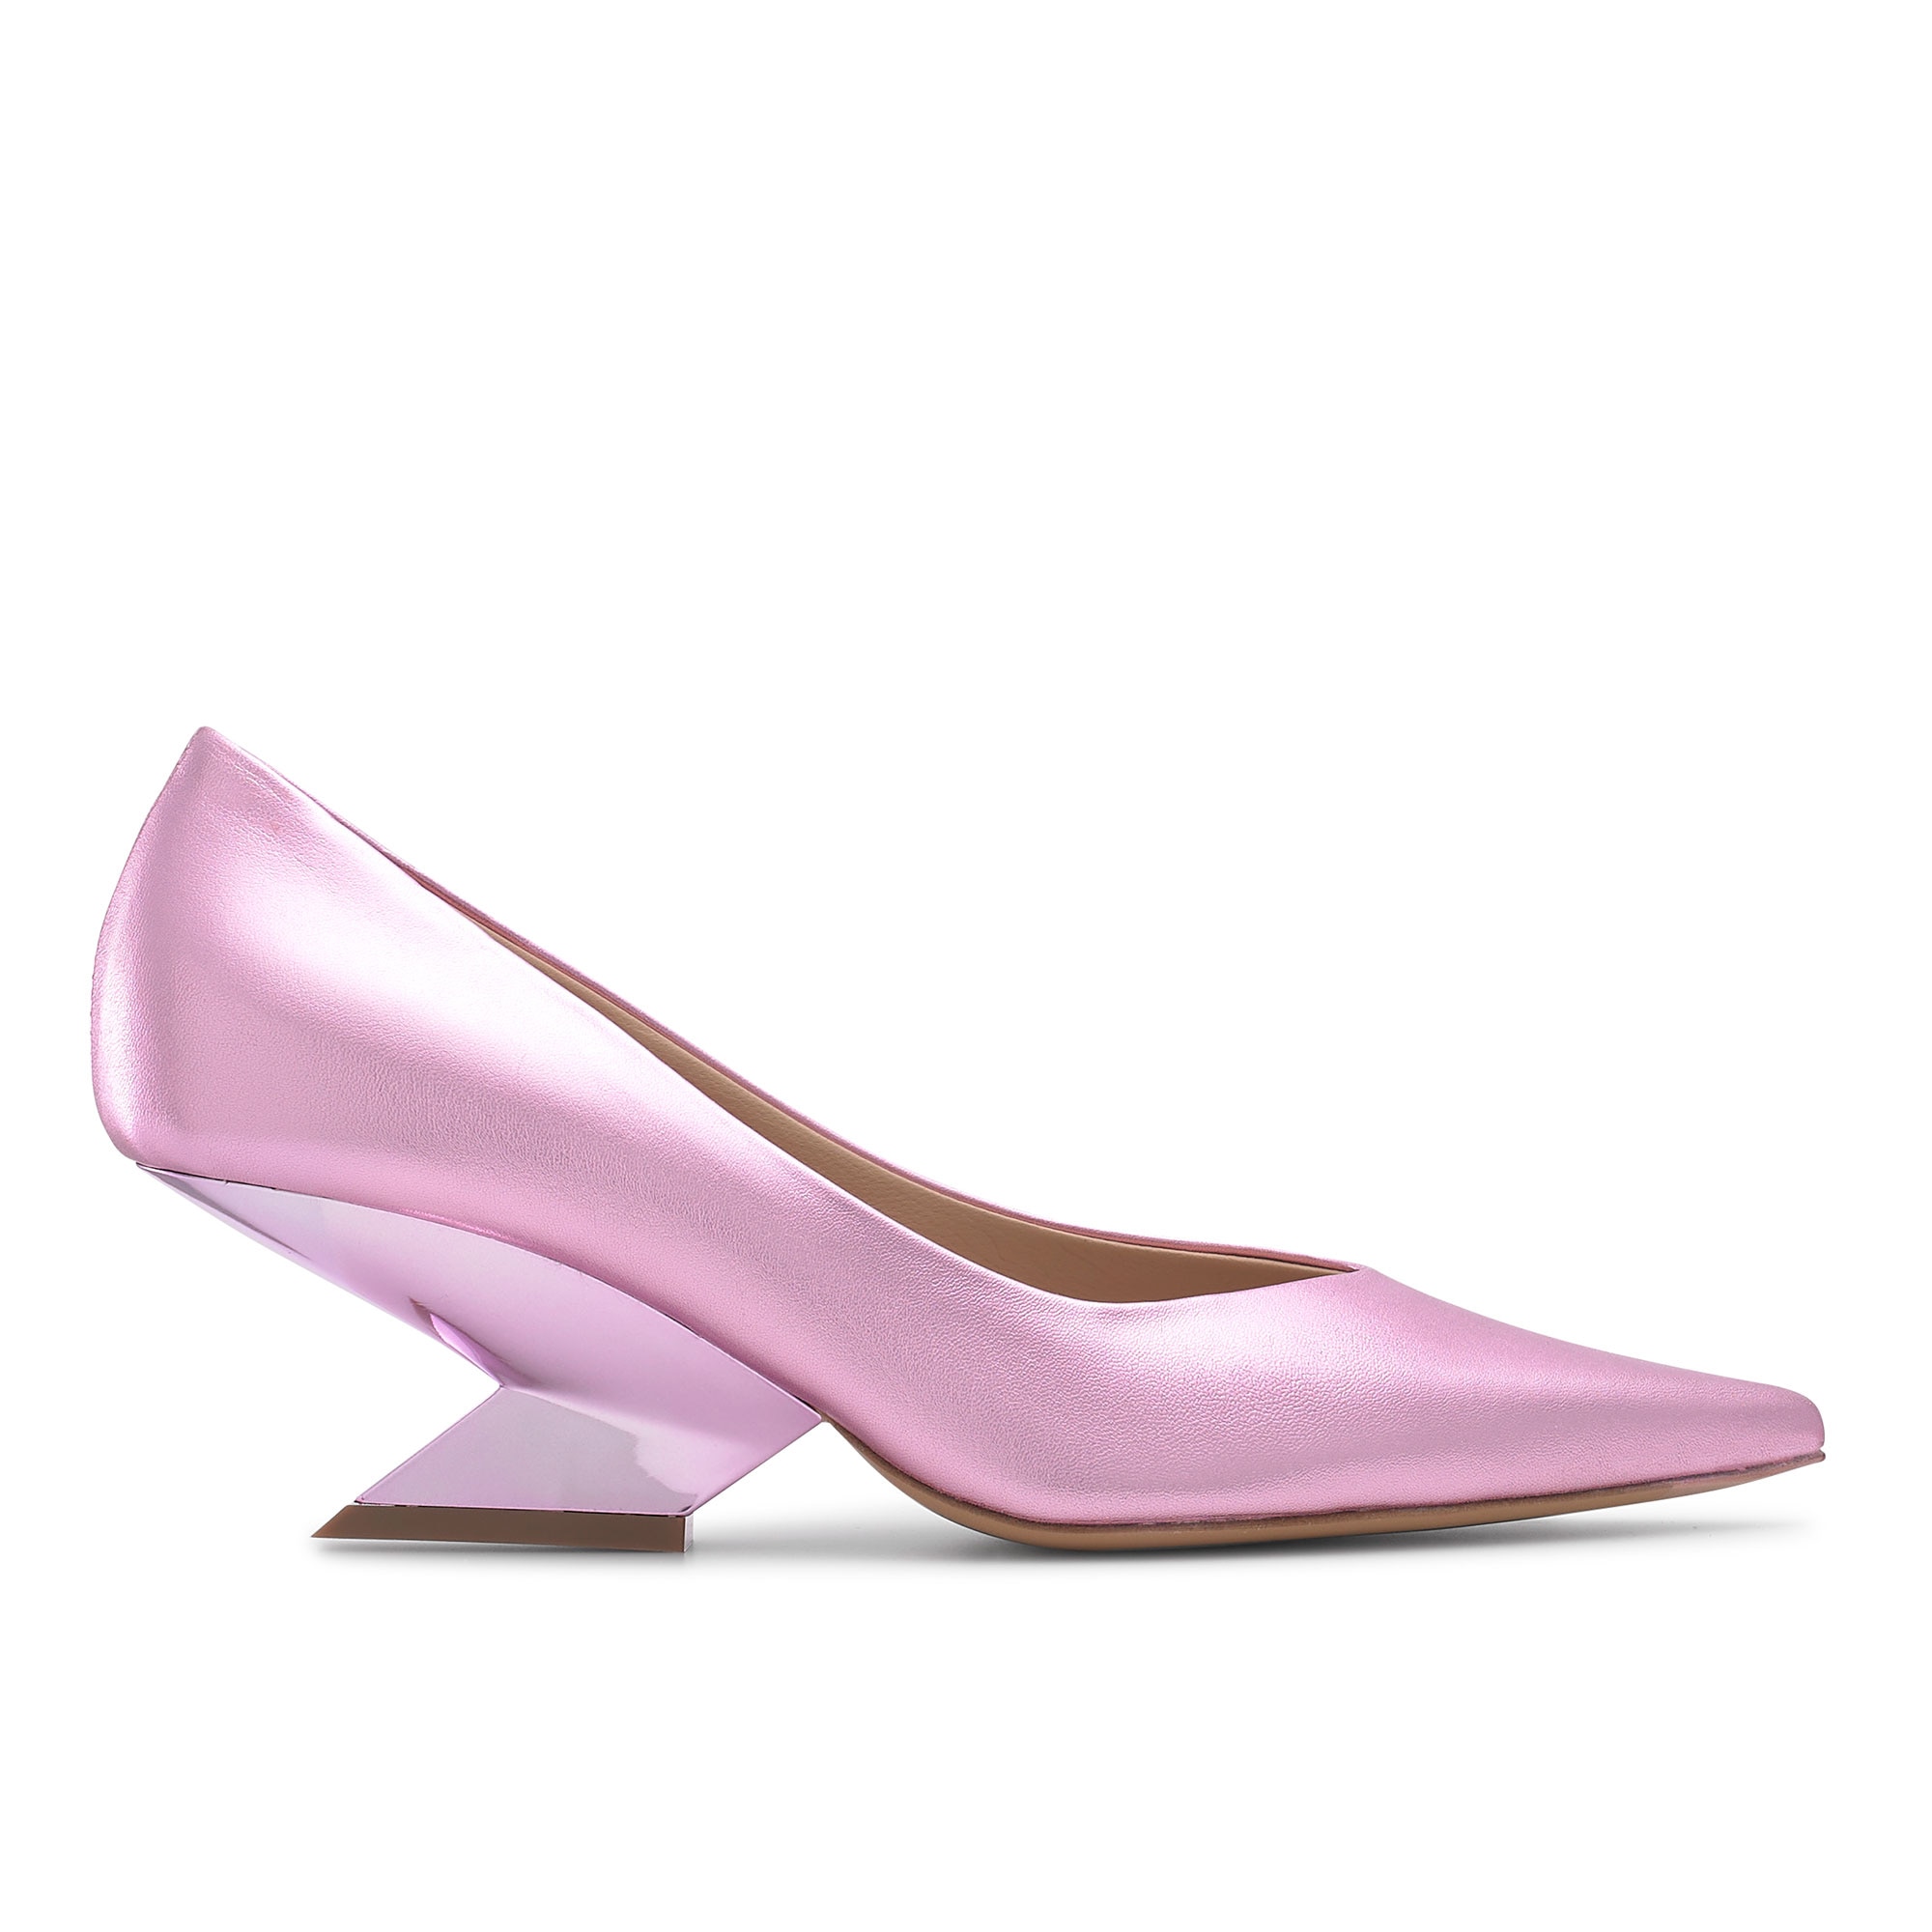 Russell and Bromley Zing shoe in pink